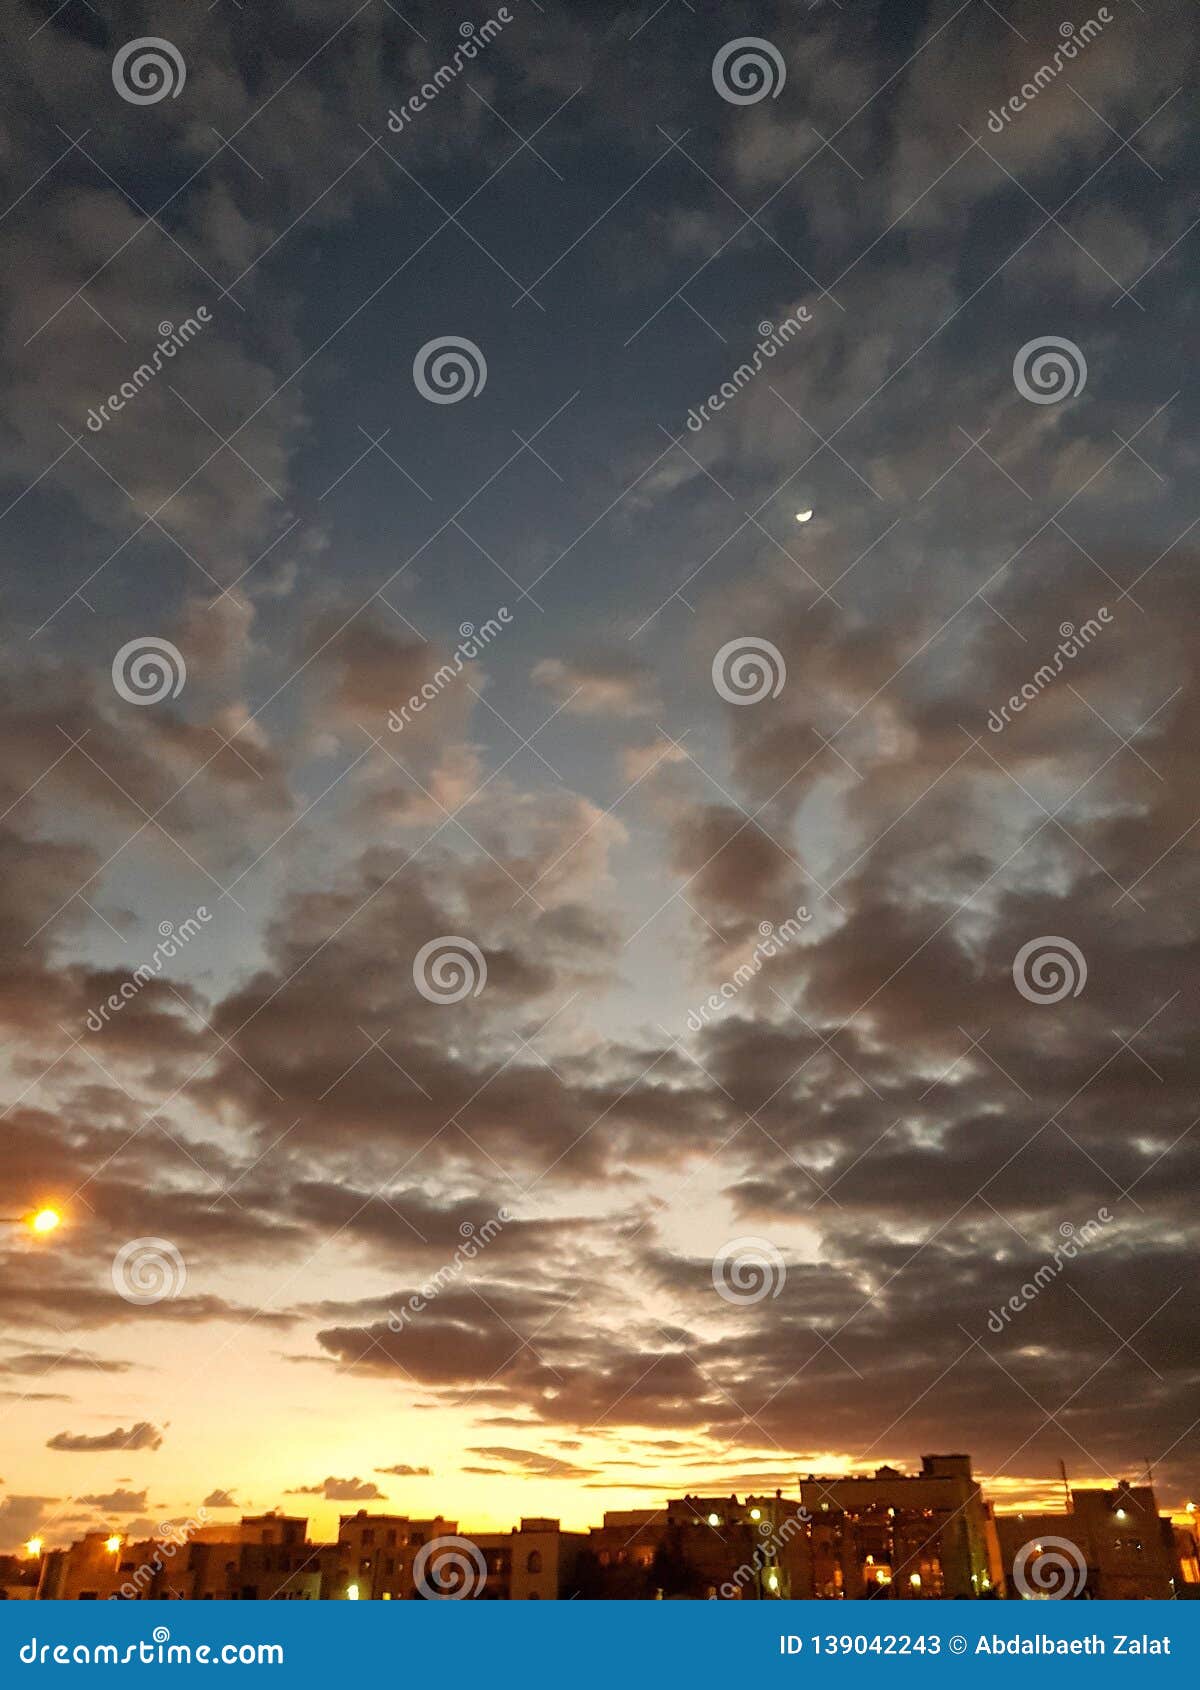 sunset and moon with cloudy skies